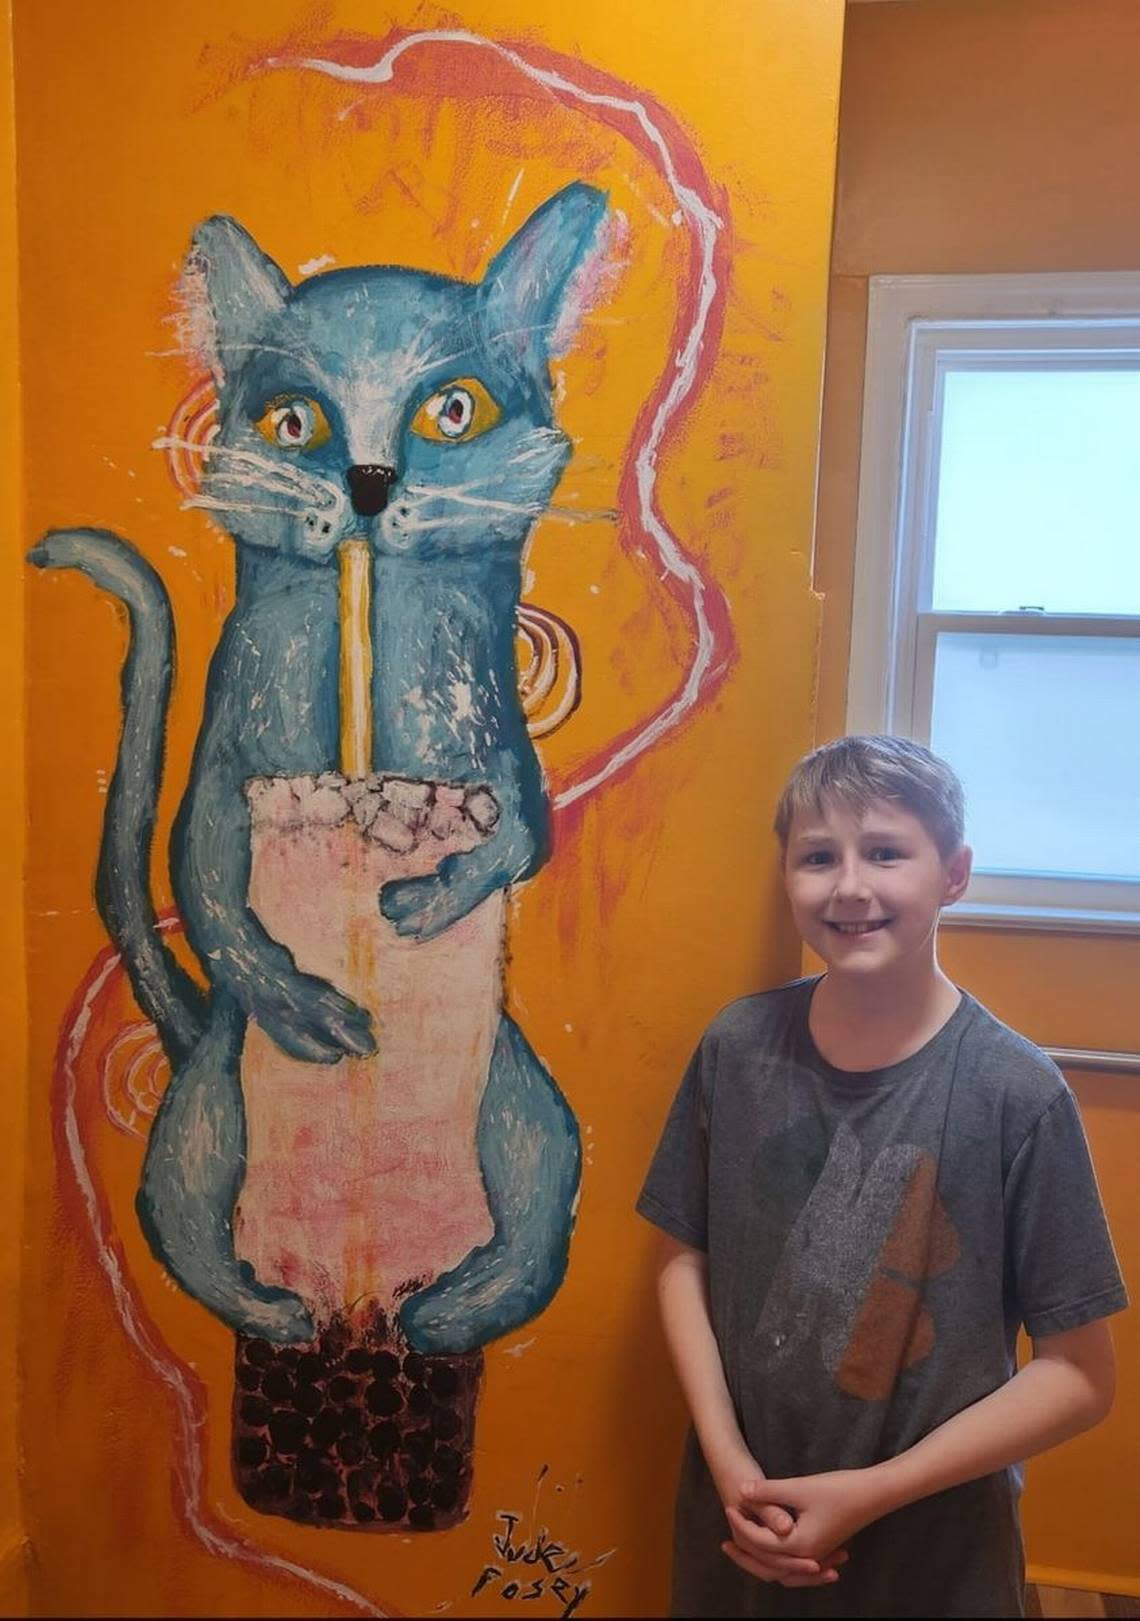 Noah Posey stands next to his artwork inside the Right Meow Cat Cafe restroom. He and his brothers assist Kayleigh and Damion with the operations of the new cafe.